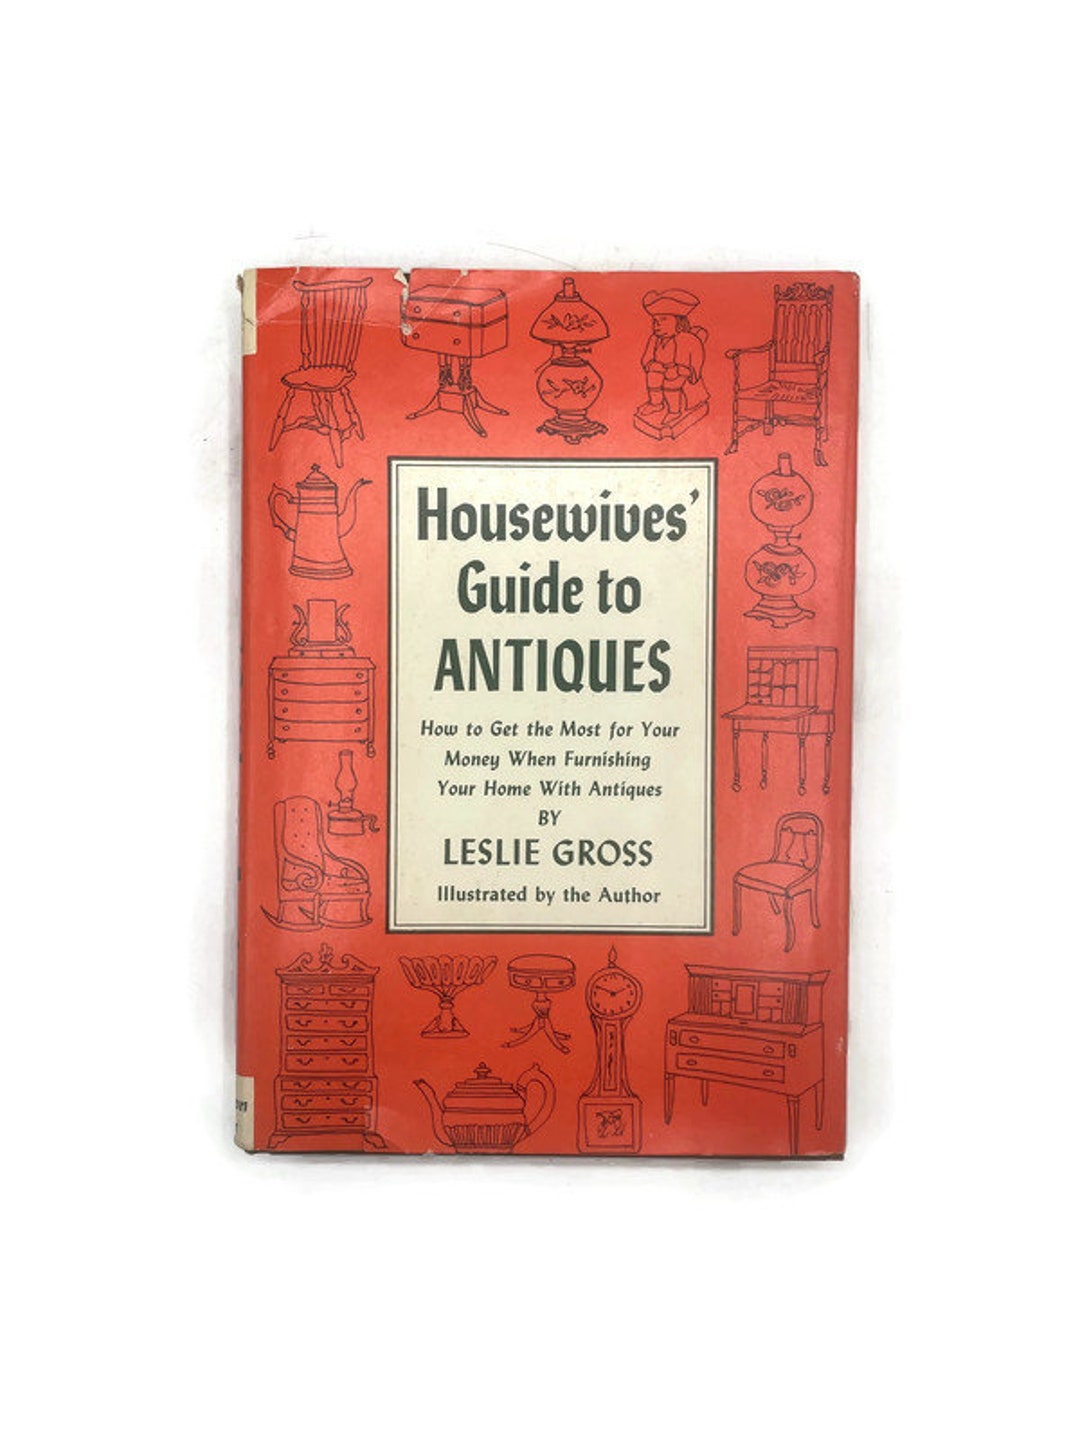 My collection of antique books : r/Antiques